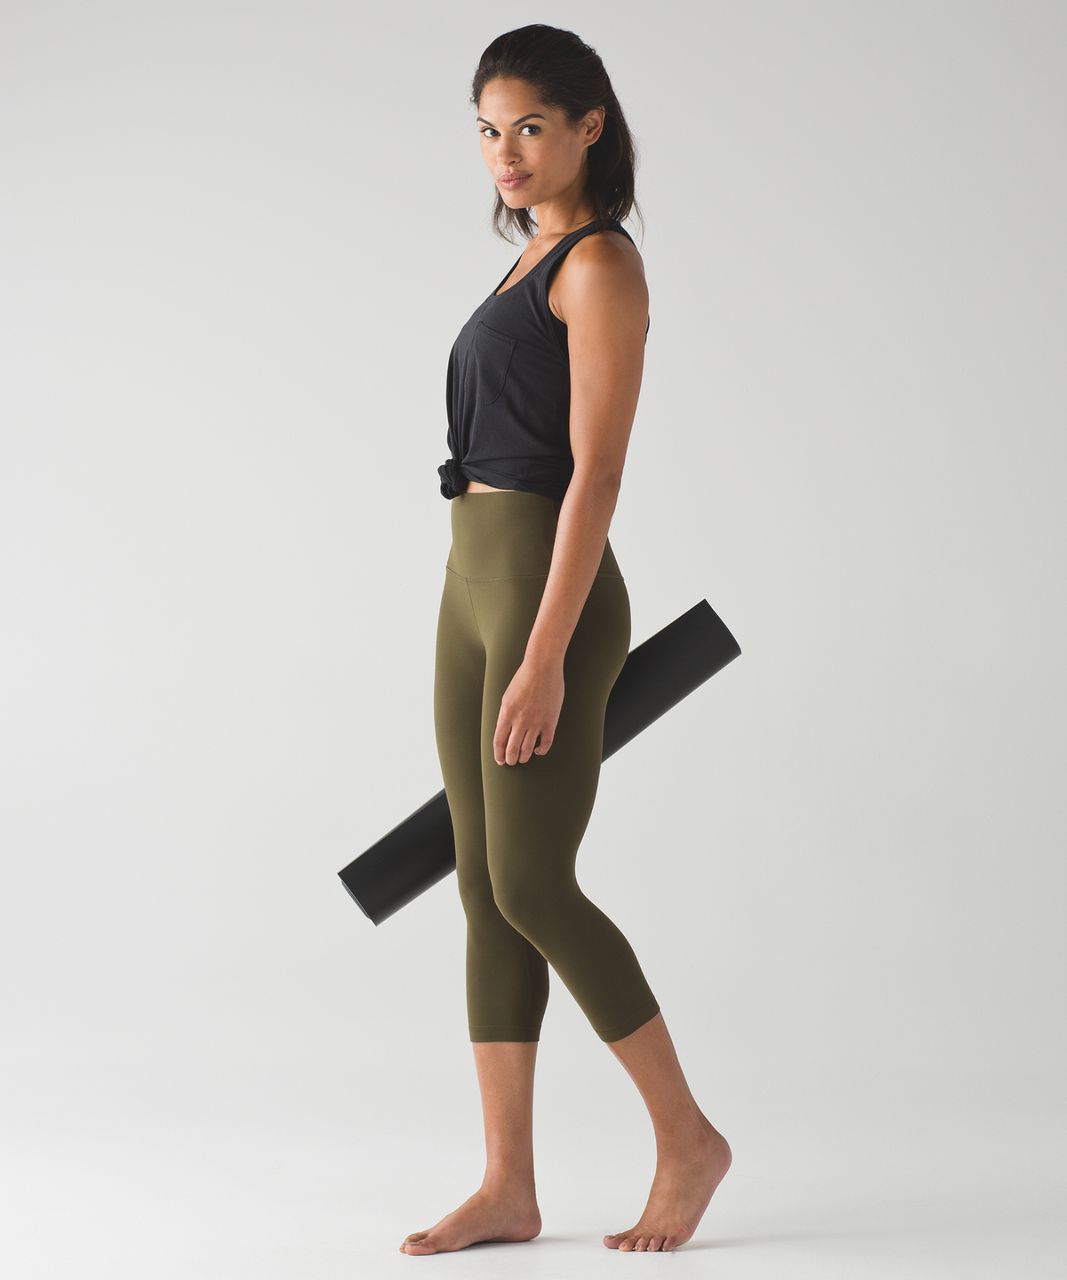 The Right Way to Shop Lululemon: Military Discount & More - Style